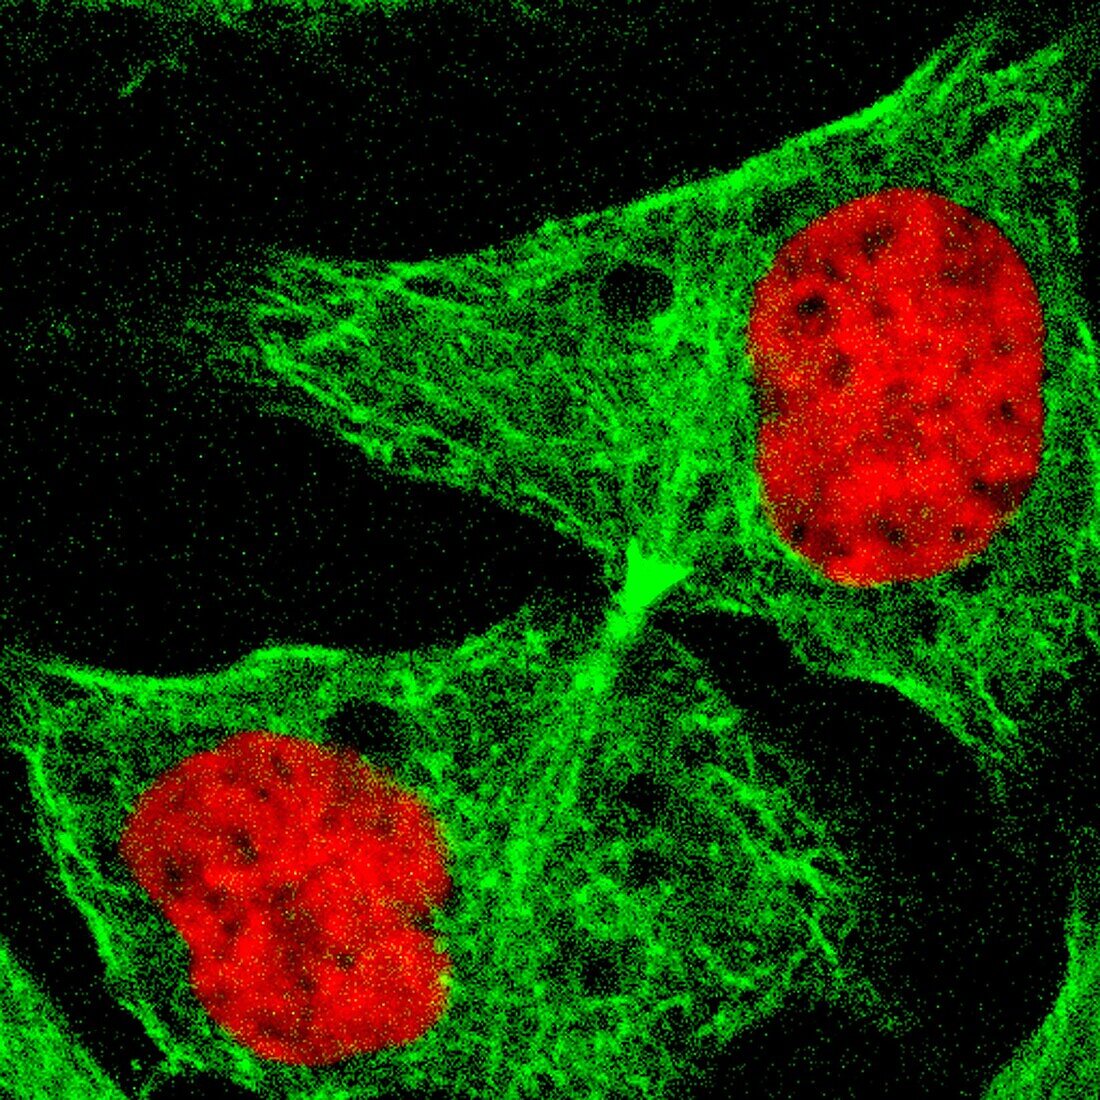 Human cell early in cytokinesis, light micrograph